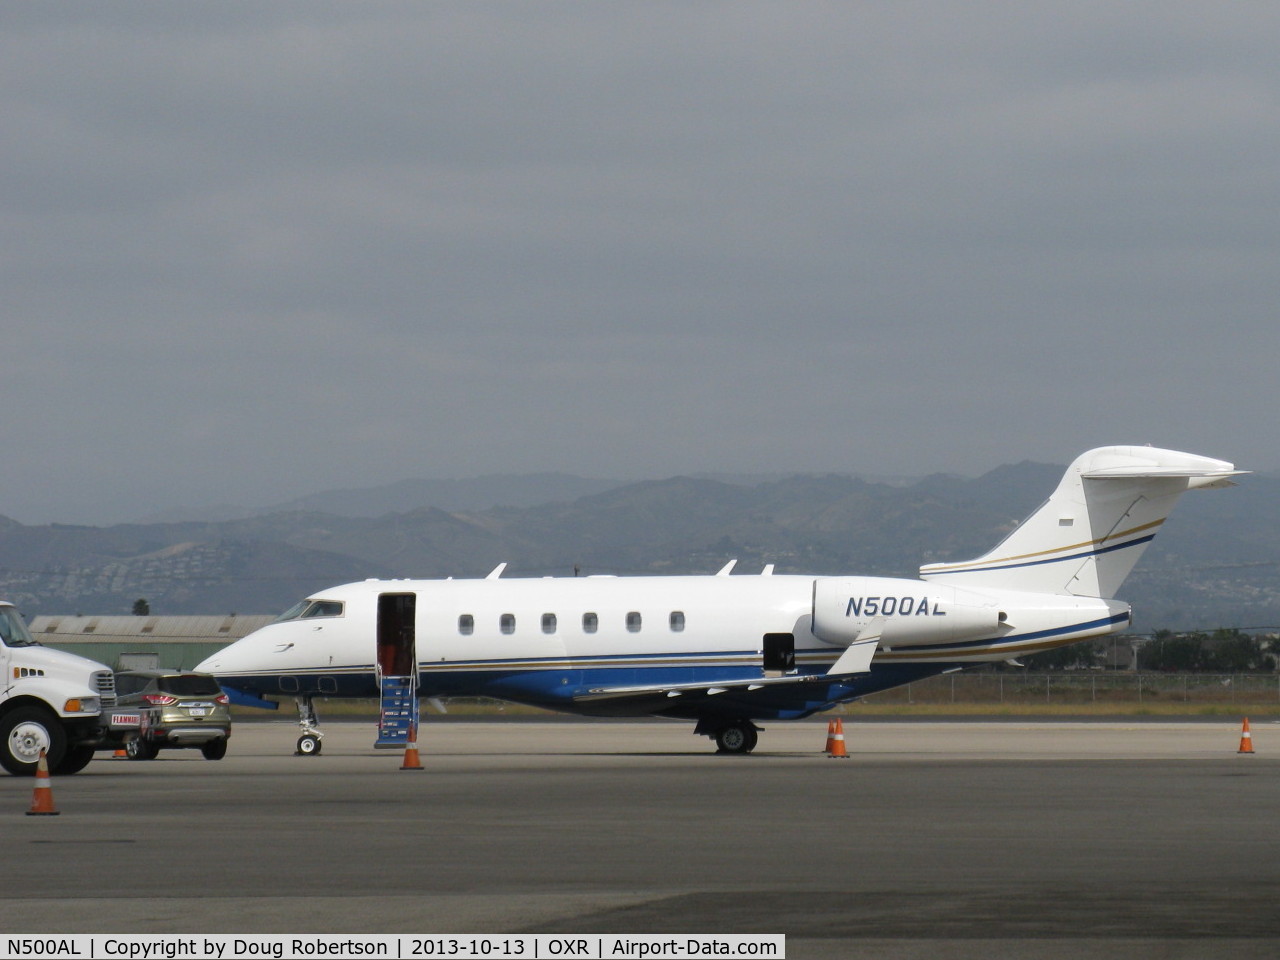 N500AL, 2006 Bombardier Challenger 300 (BD-100-1A10) C/N 20092, 2006 Bombardier BD-100-1A10 CHALLENGER, Two Honeywell HTF7000 (formerly AS907) Turbofans with FADEC, flat rated at 6,500 lb st each. Mmo 0.83 Mach above 29,475 ft. Of Abbott Laboratories.